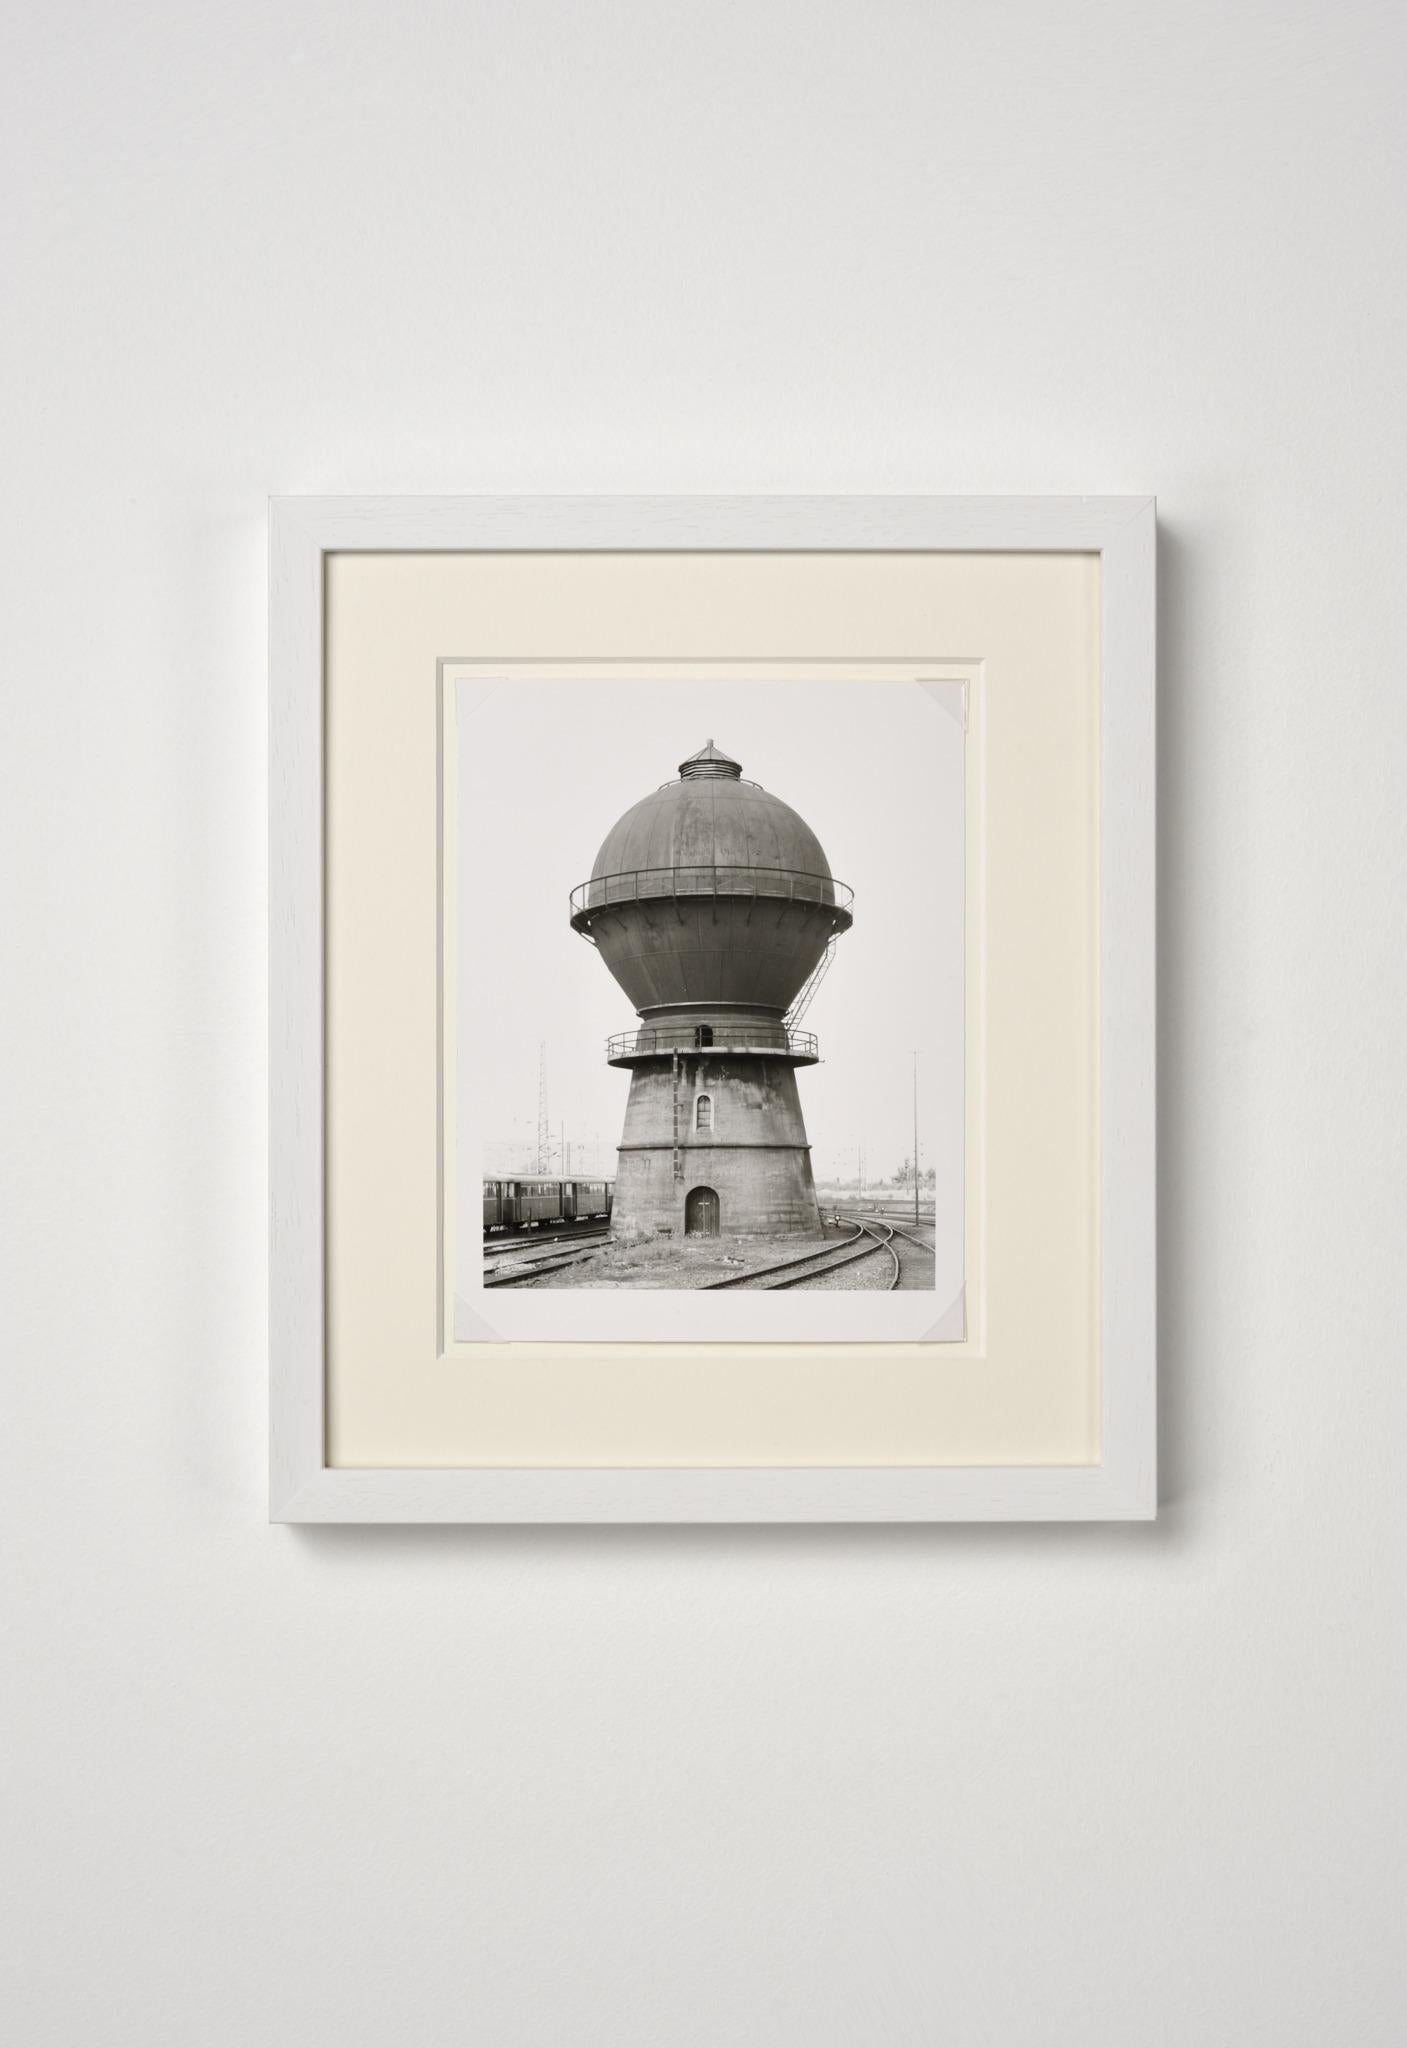 Bernd and Hilla Becher
Trier-Ehrang, D, 1982/2009
2009
Gelatin Silverprint
24 × 18 cm
(9.4 × 7.1 in)
Signed and numbered
Edition of 100
In mint condition

PLEASE NOTE: Images of edition number are example references only.
The seller can only provide